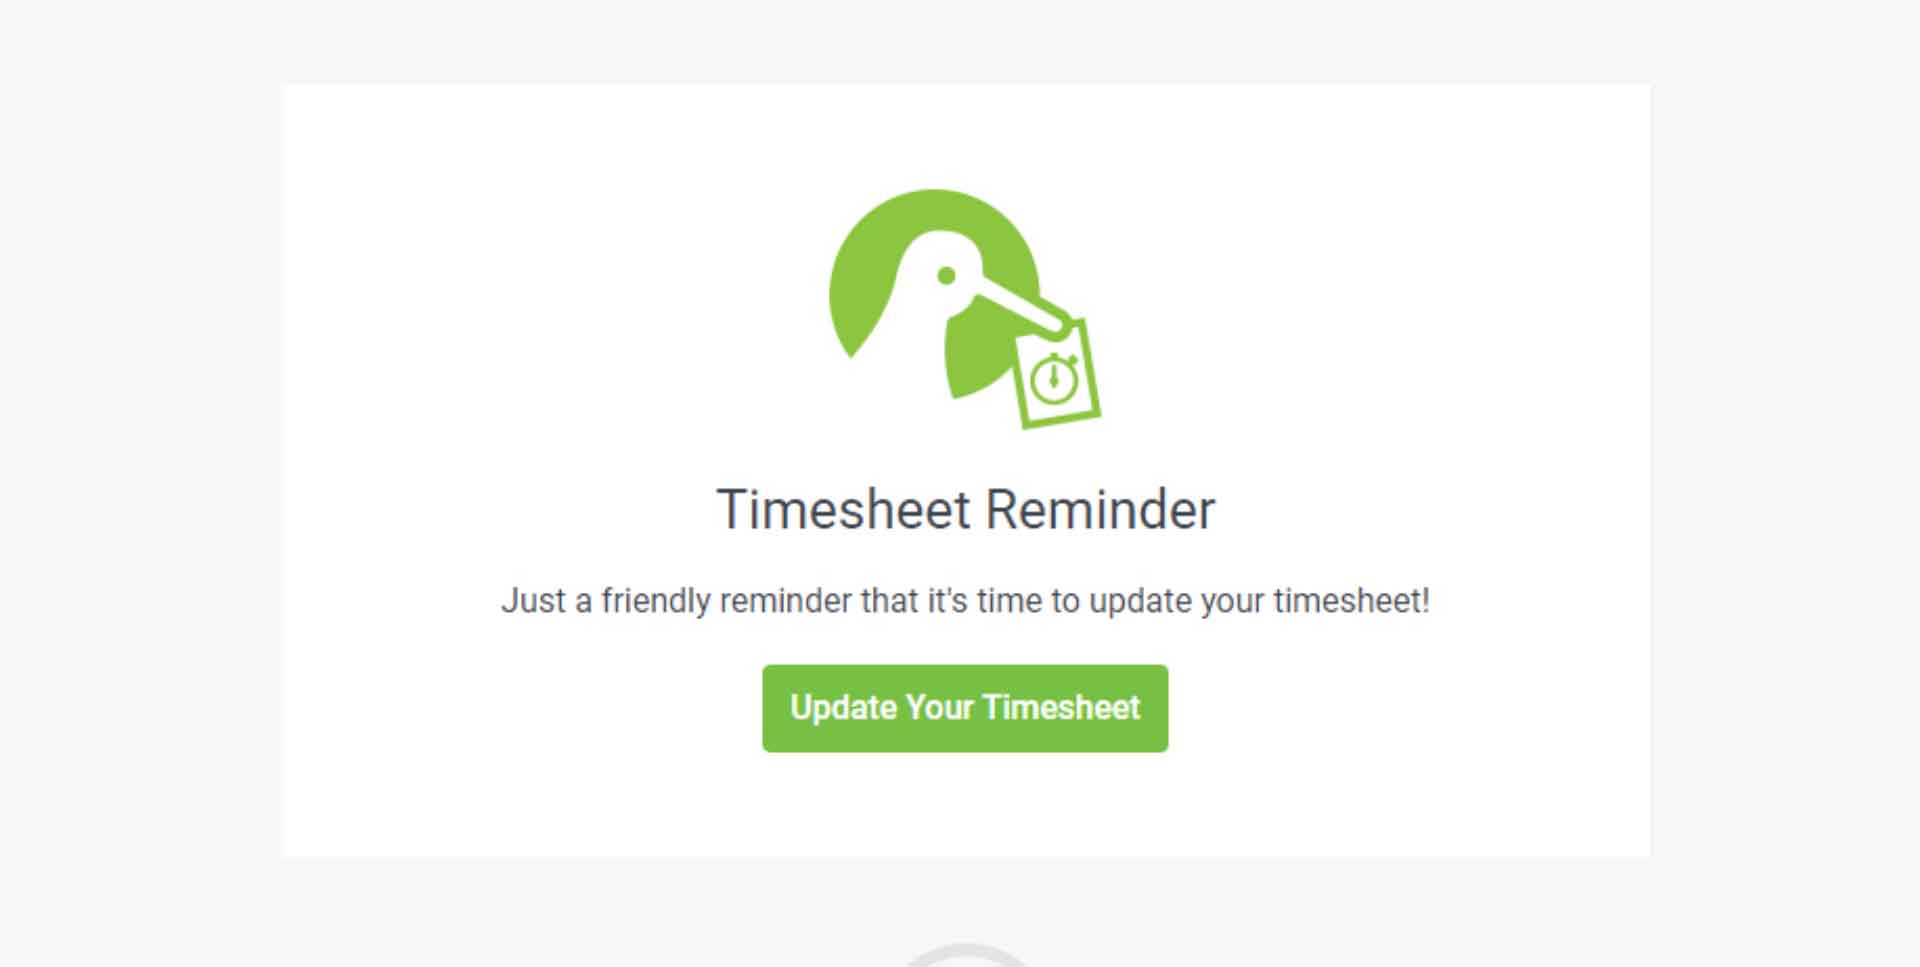 A screenshot of an automatically sent ProjectManager.com email, reminding users to update their timesheet.